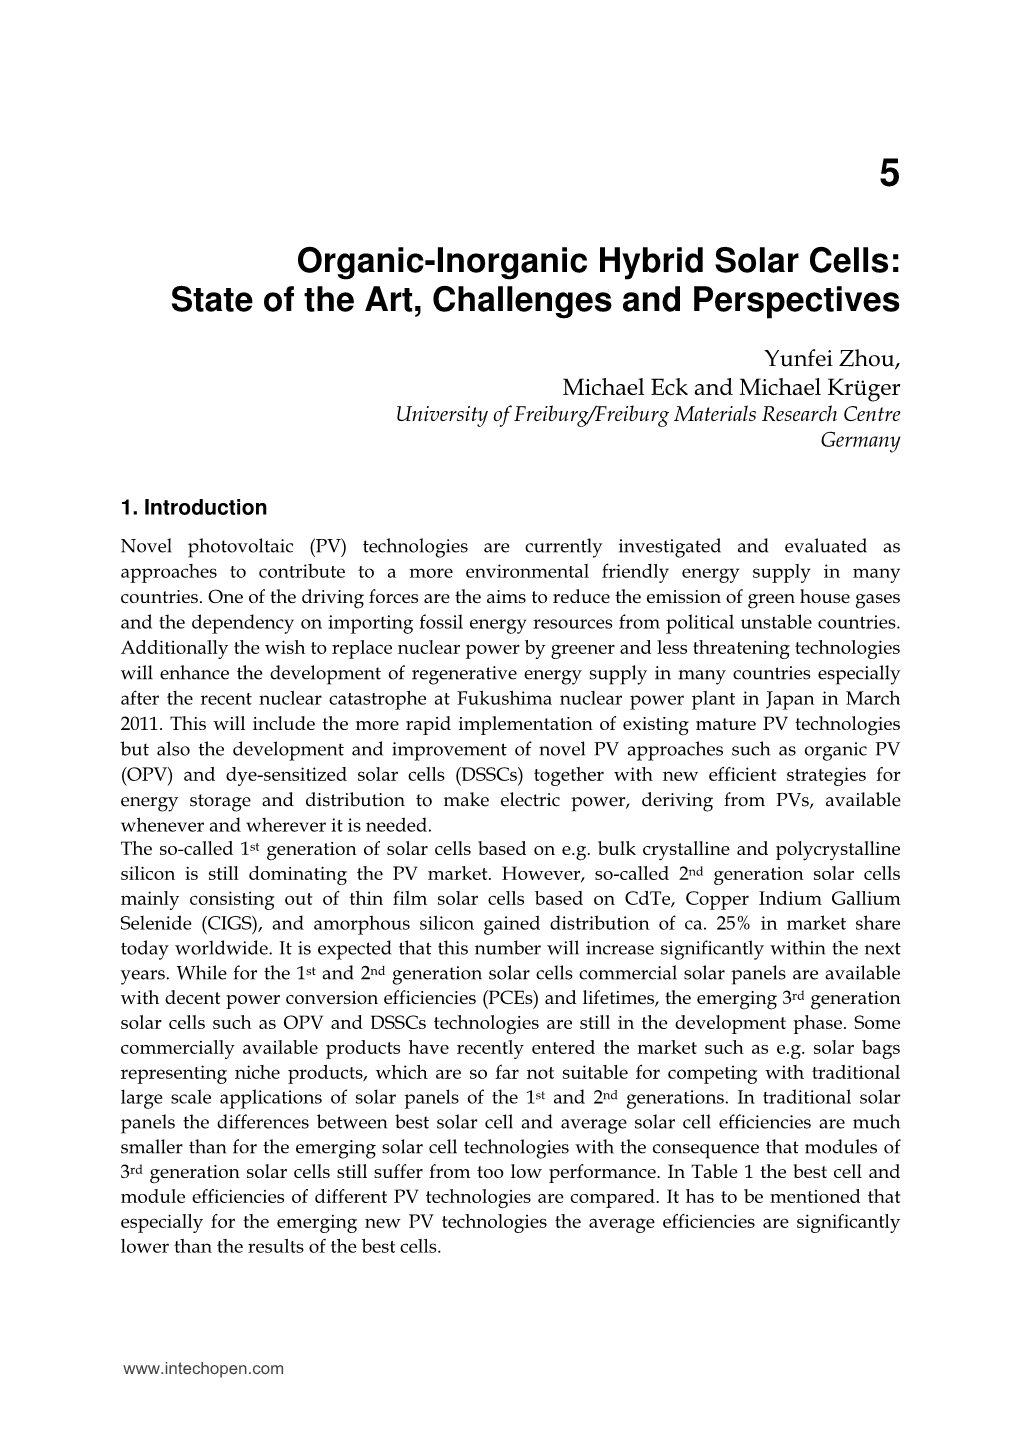 Organic-Inorganic Hybrid Solar Cells: State of the Art, Challenges and Perspectives